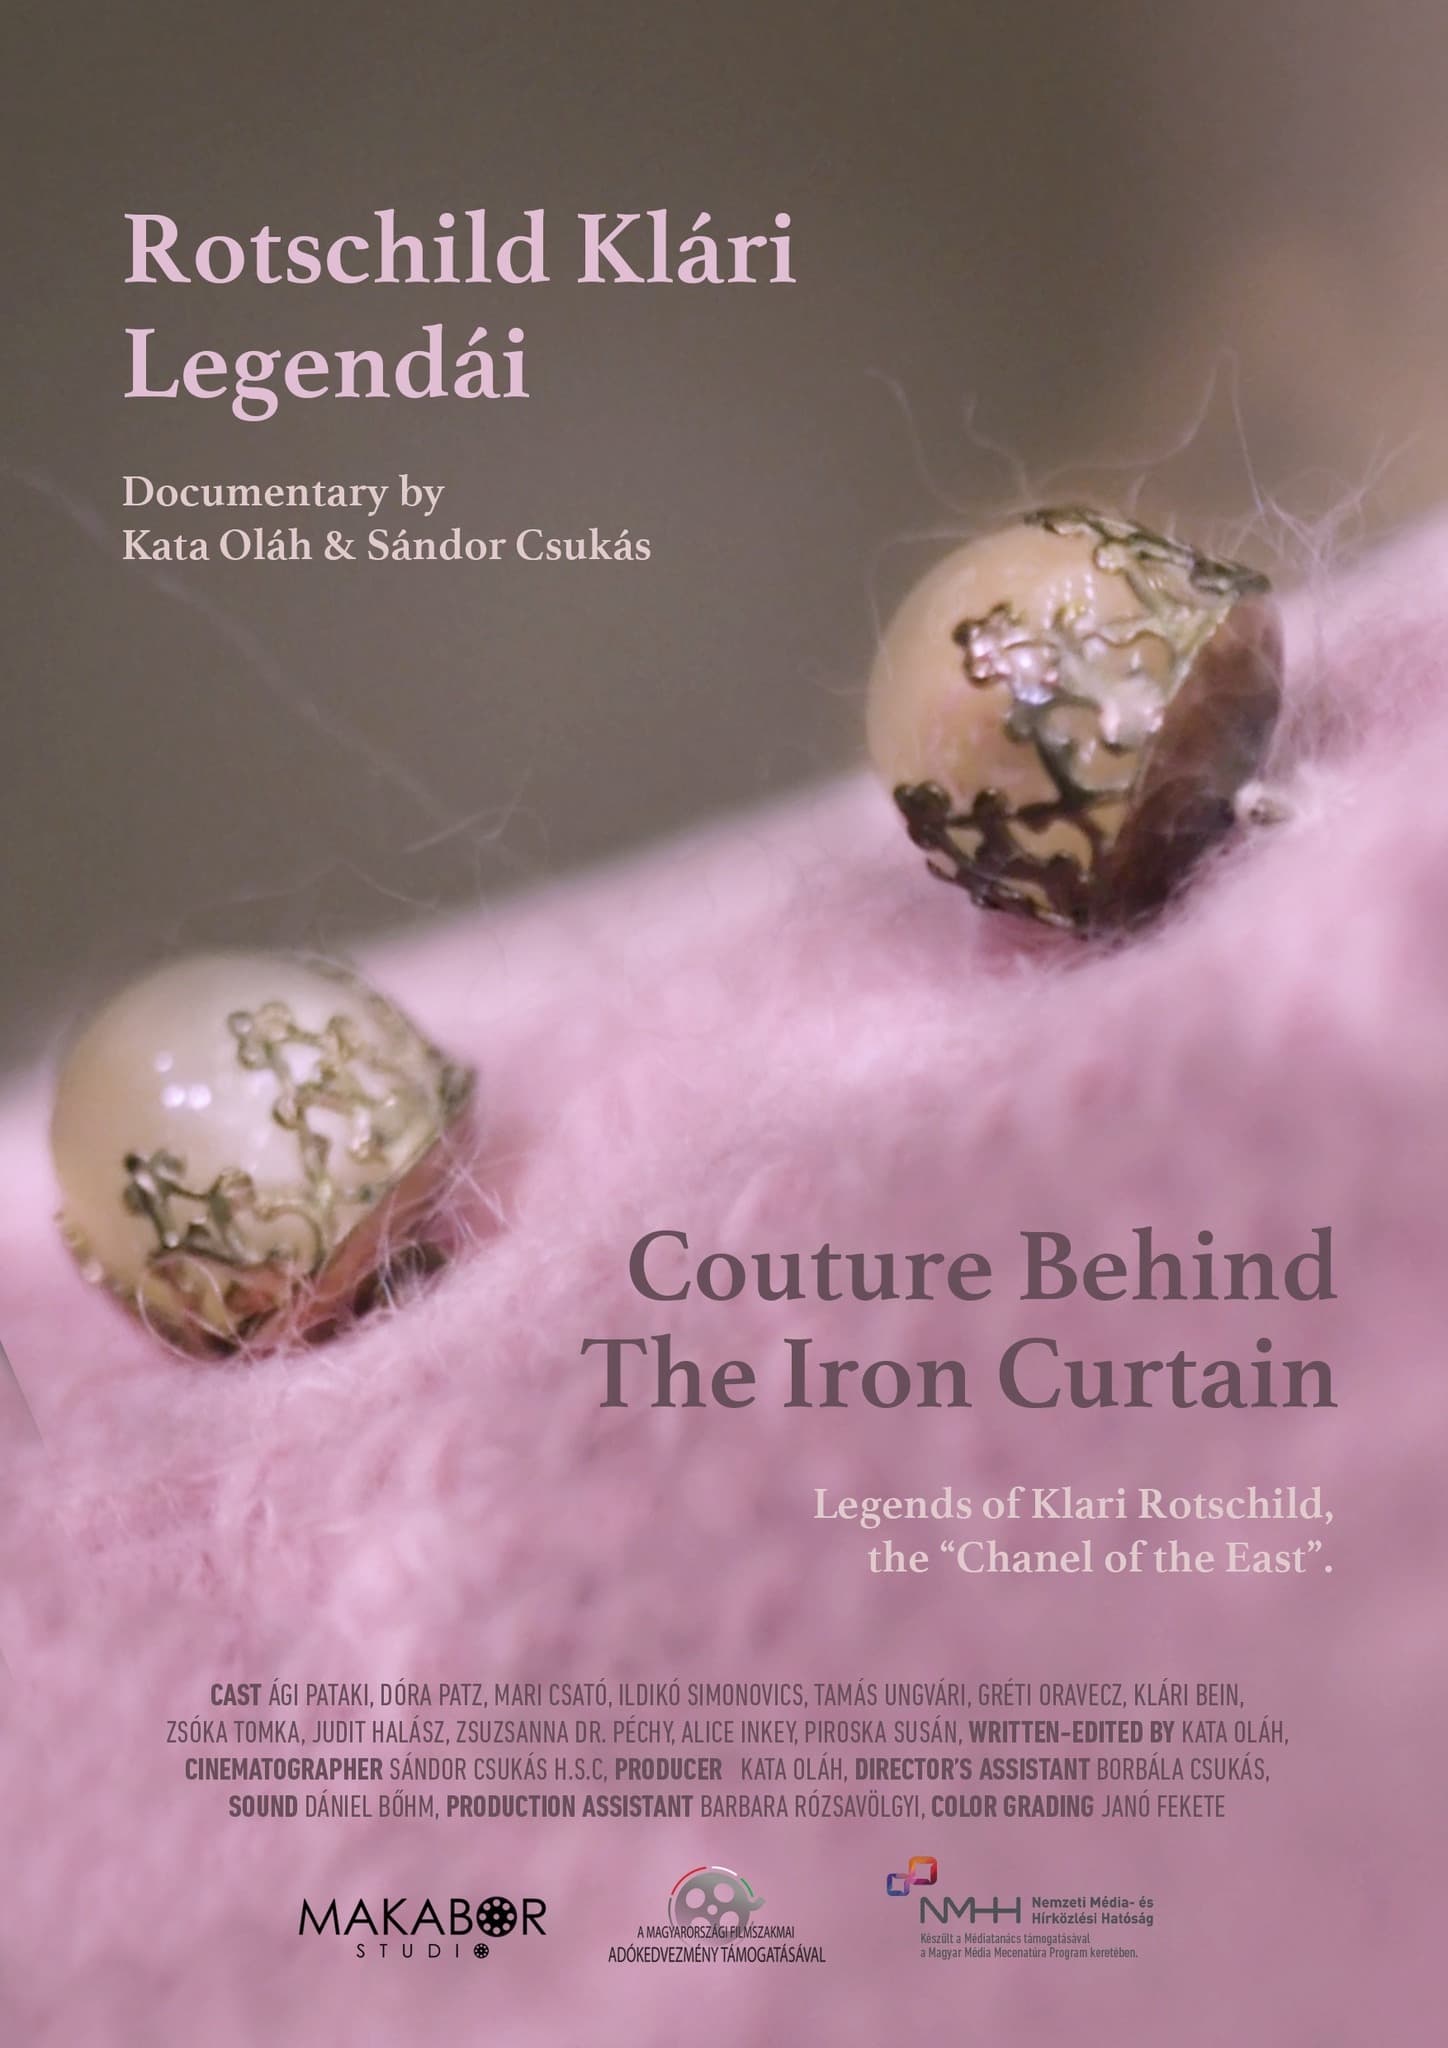 Couture Behind The Iron Curtain